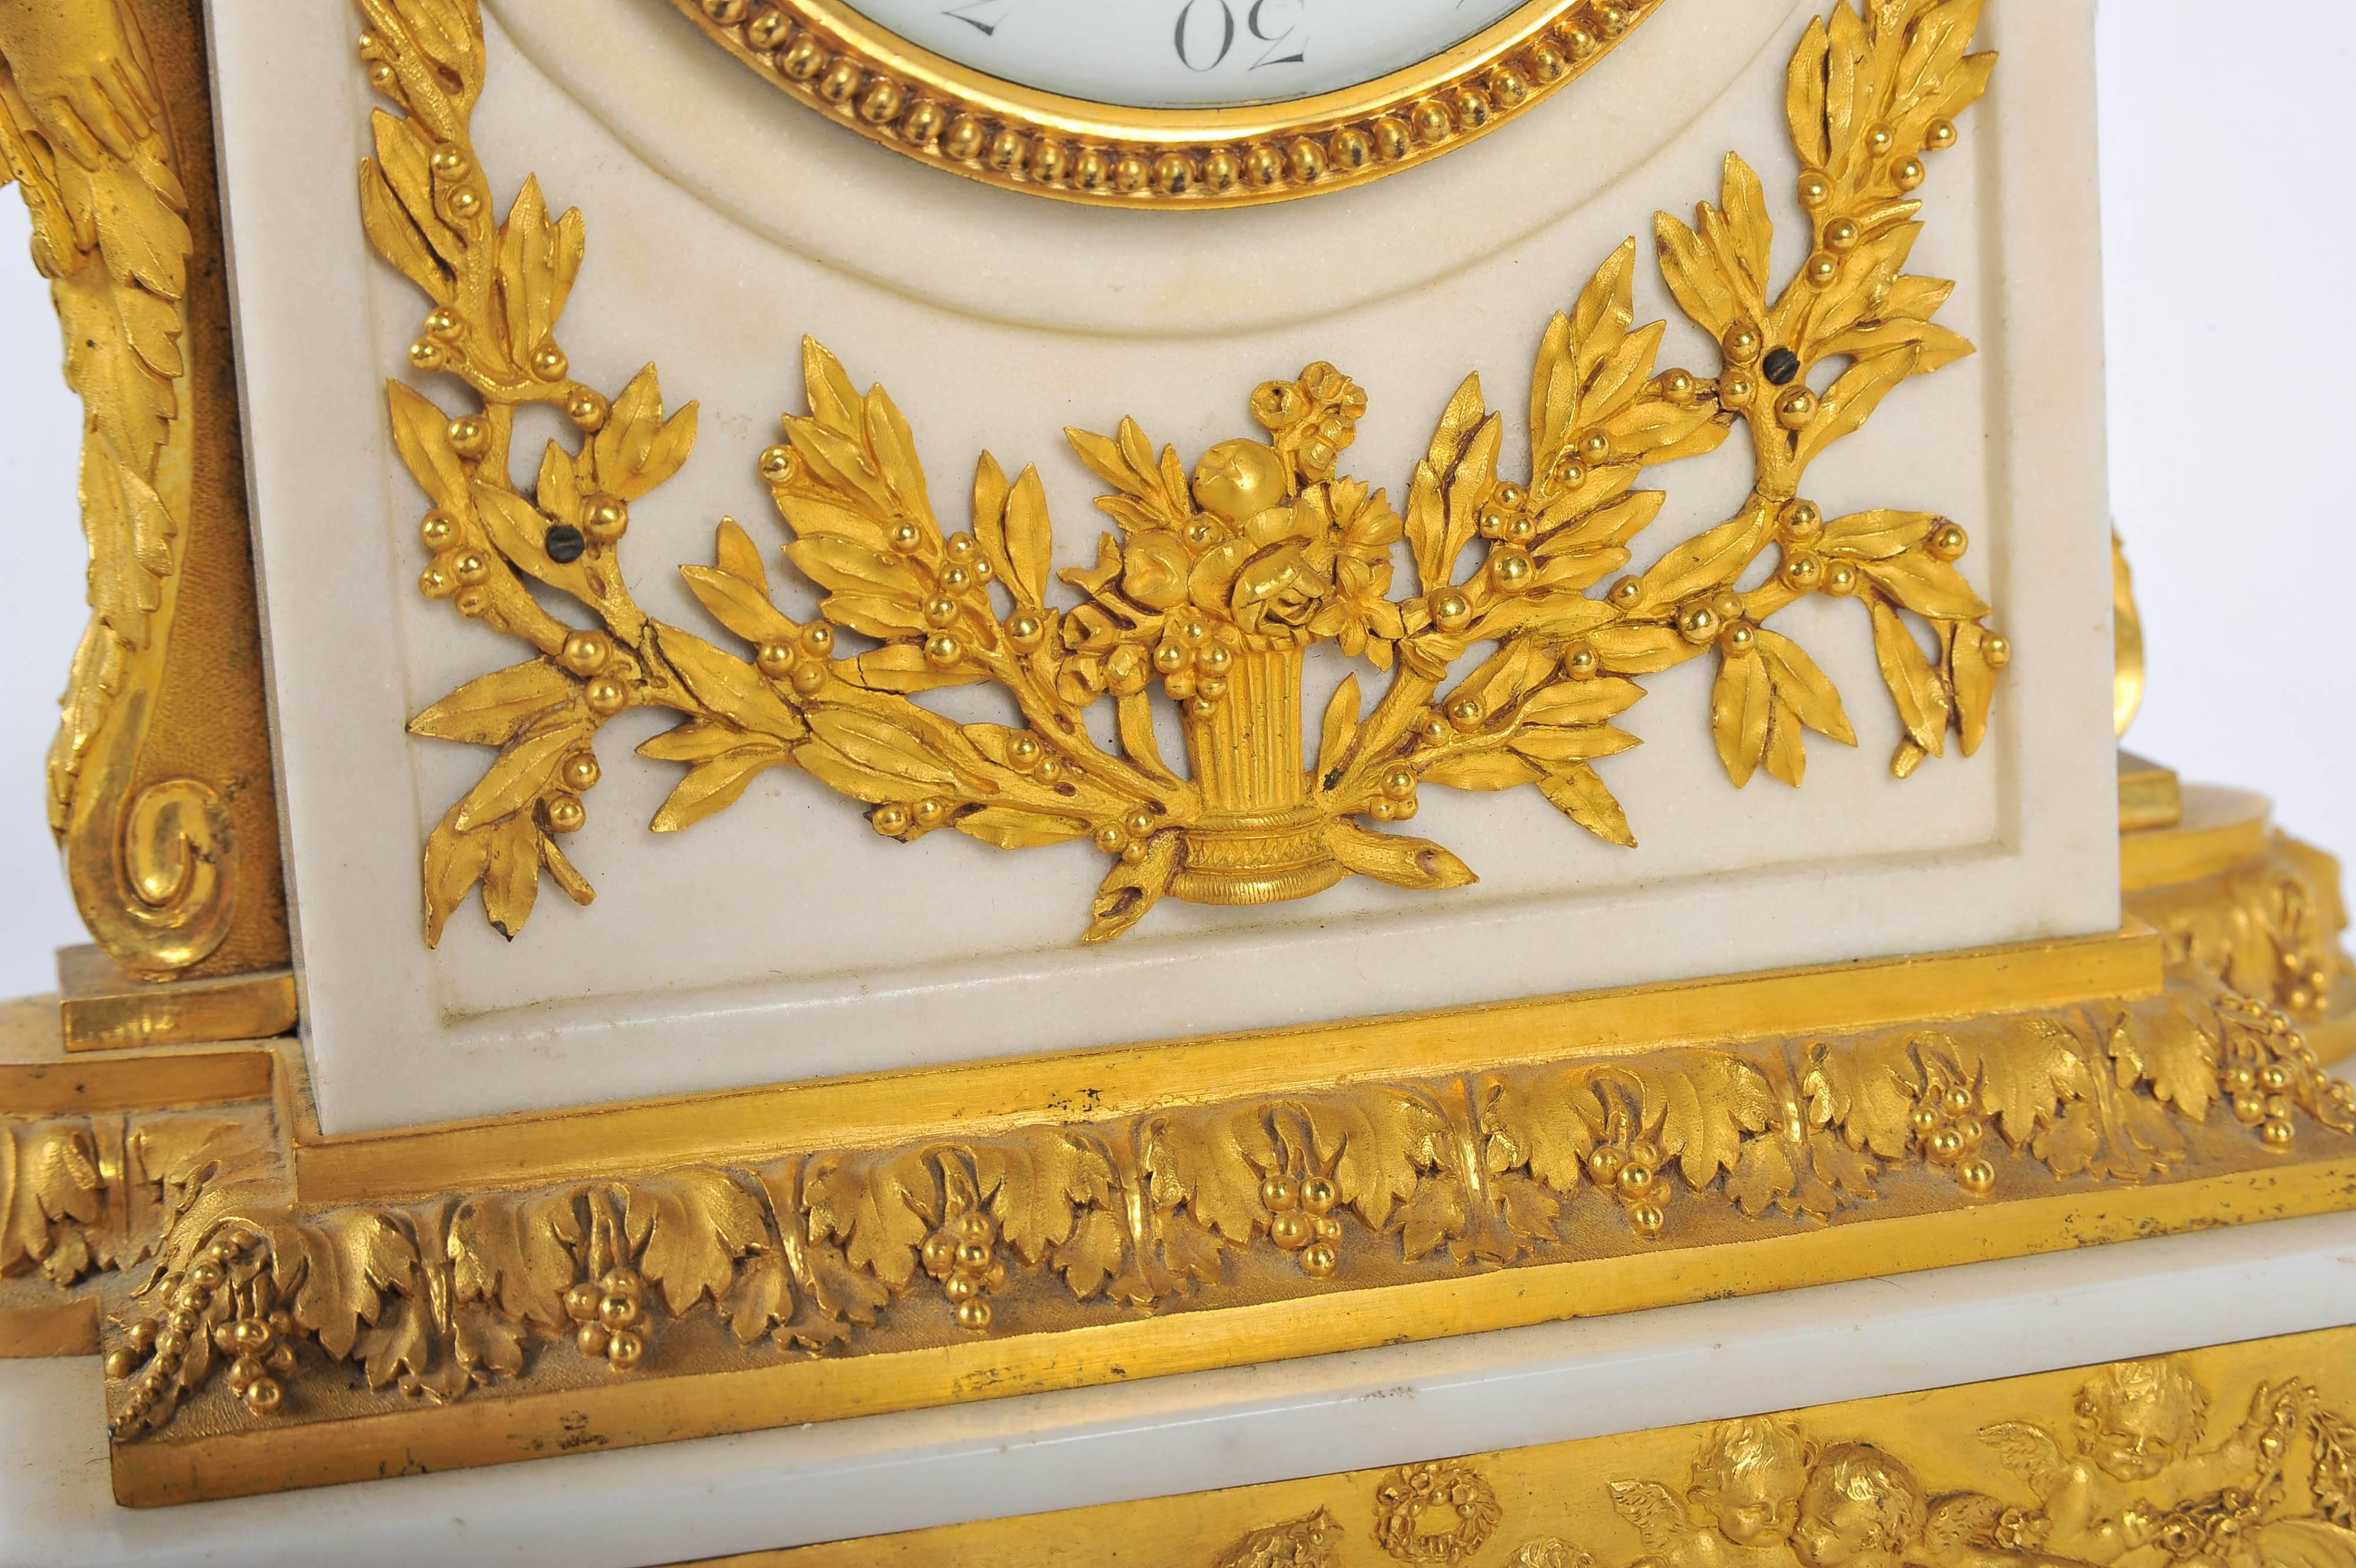 Carved 19th Century French Mantel Clock, Louis XVI style, by Festeau, Paris